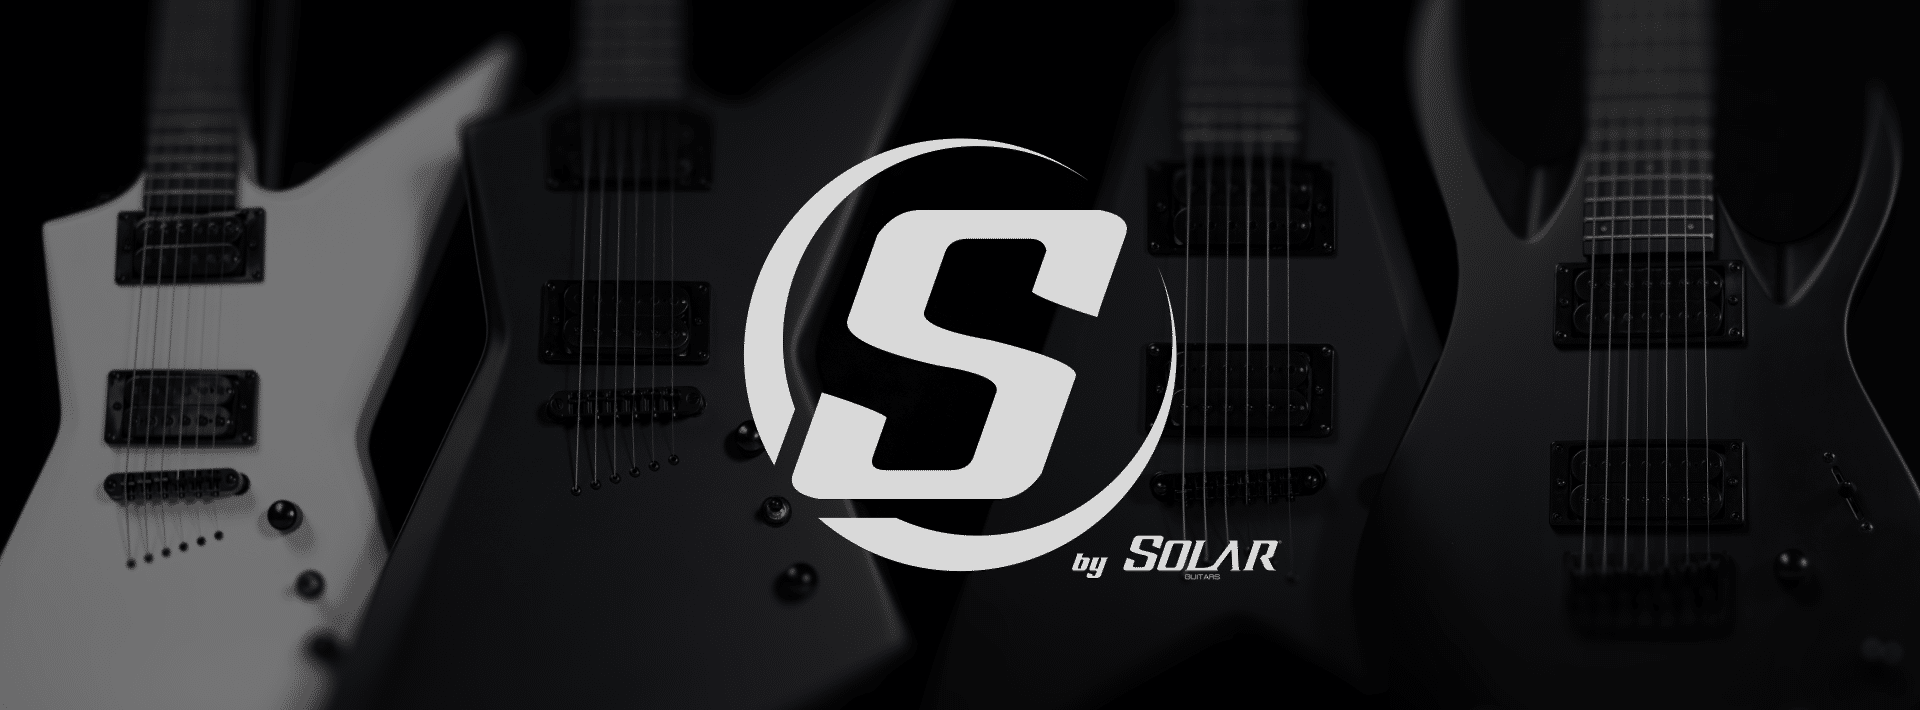 Welcome to the S BY SOLAR website !